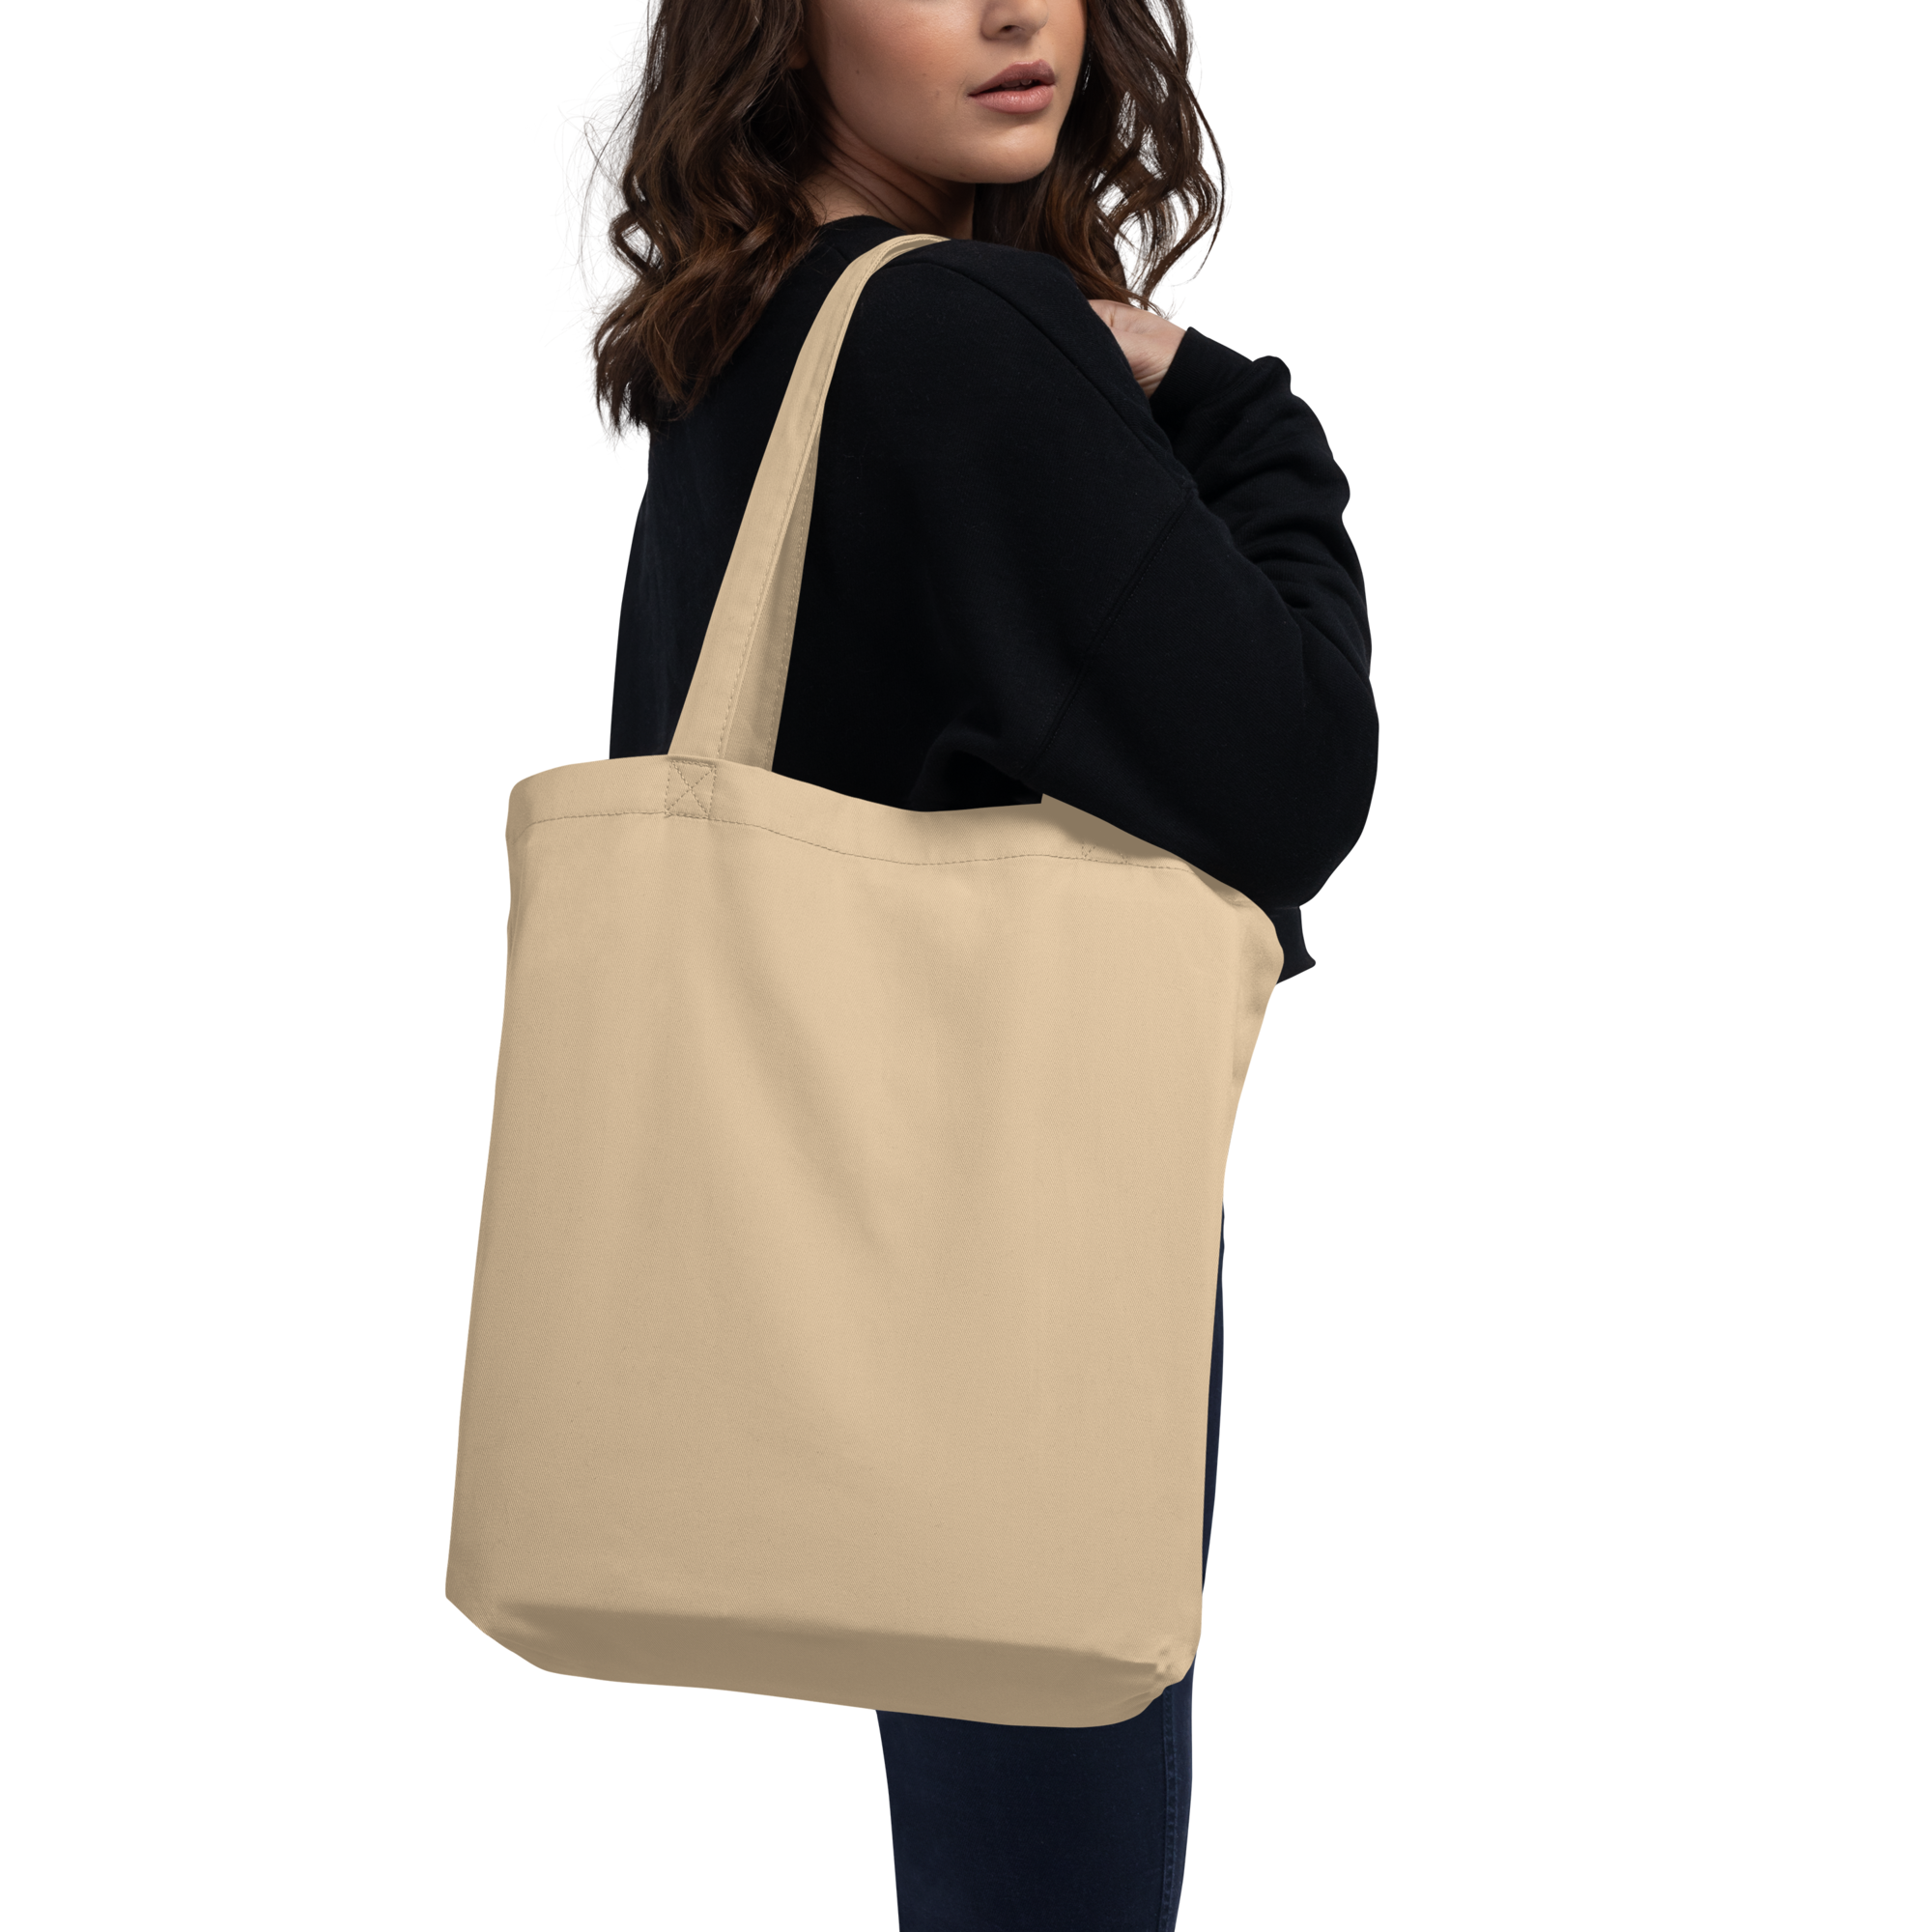 The Pelly Tote